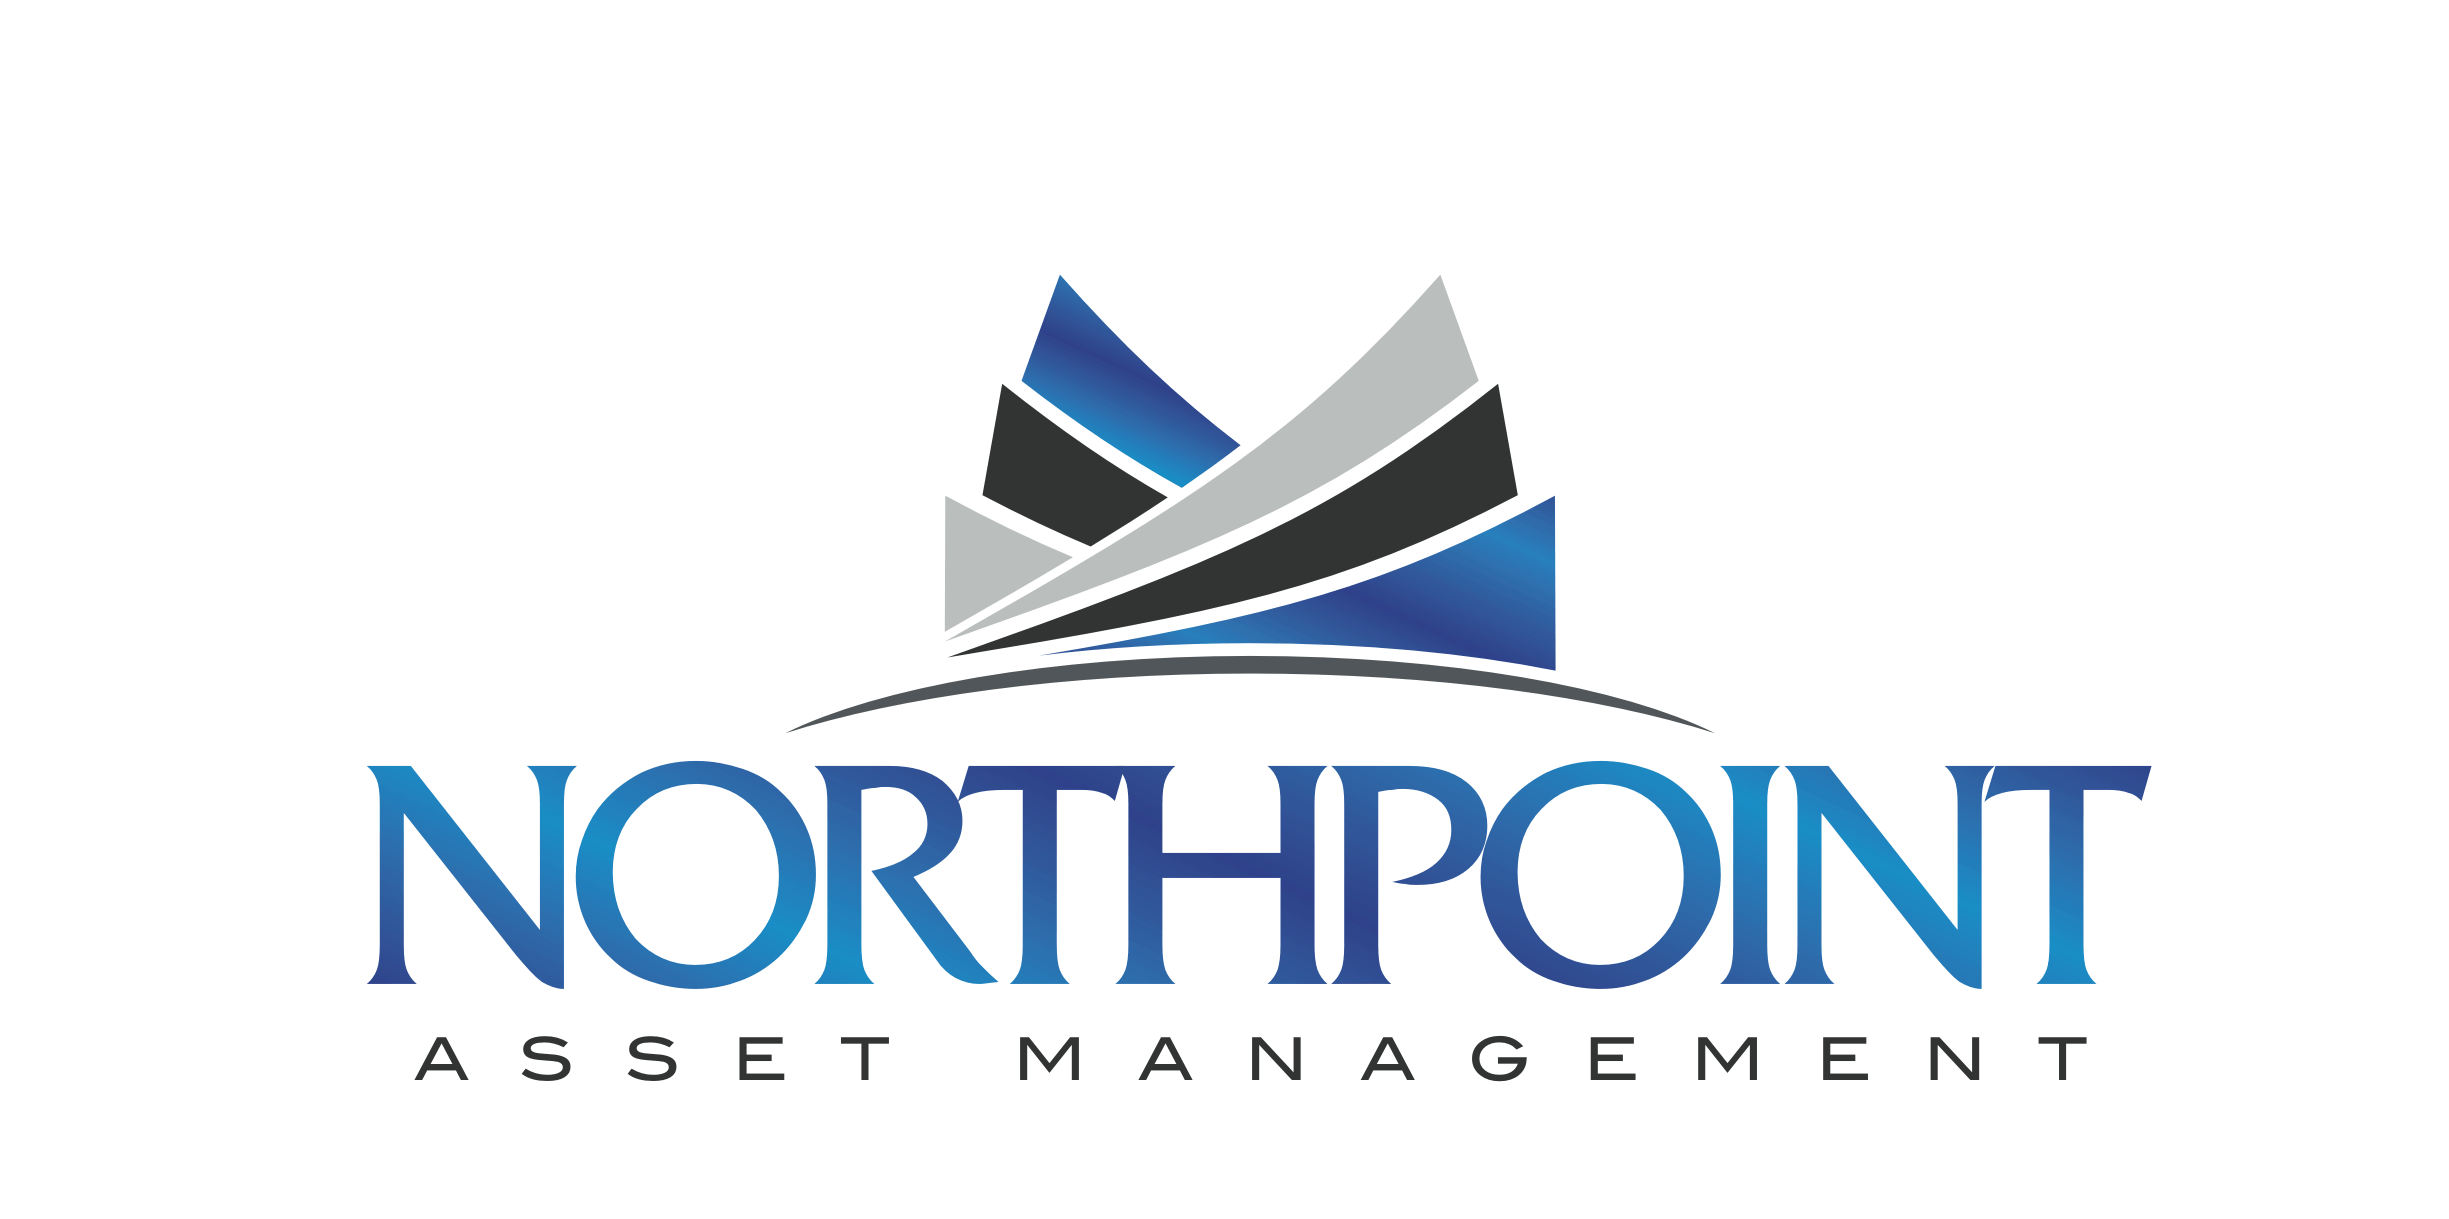 Northpoint Asset Management - UT Residential logo